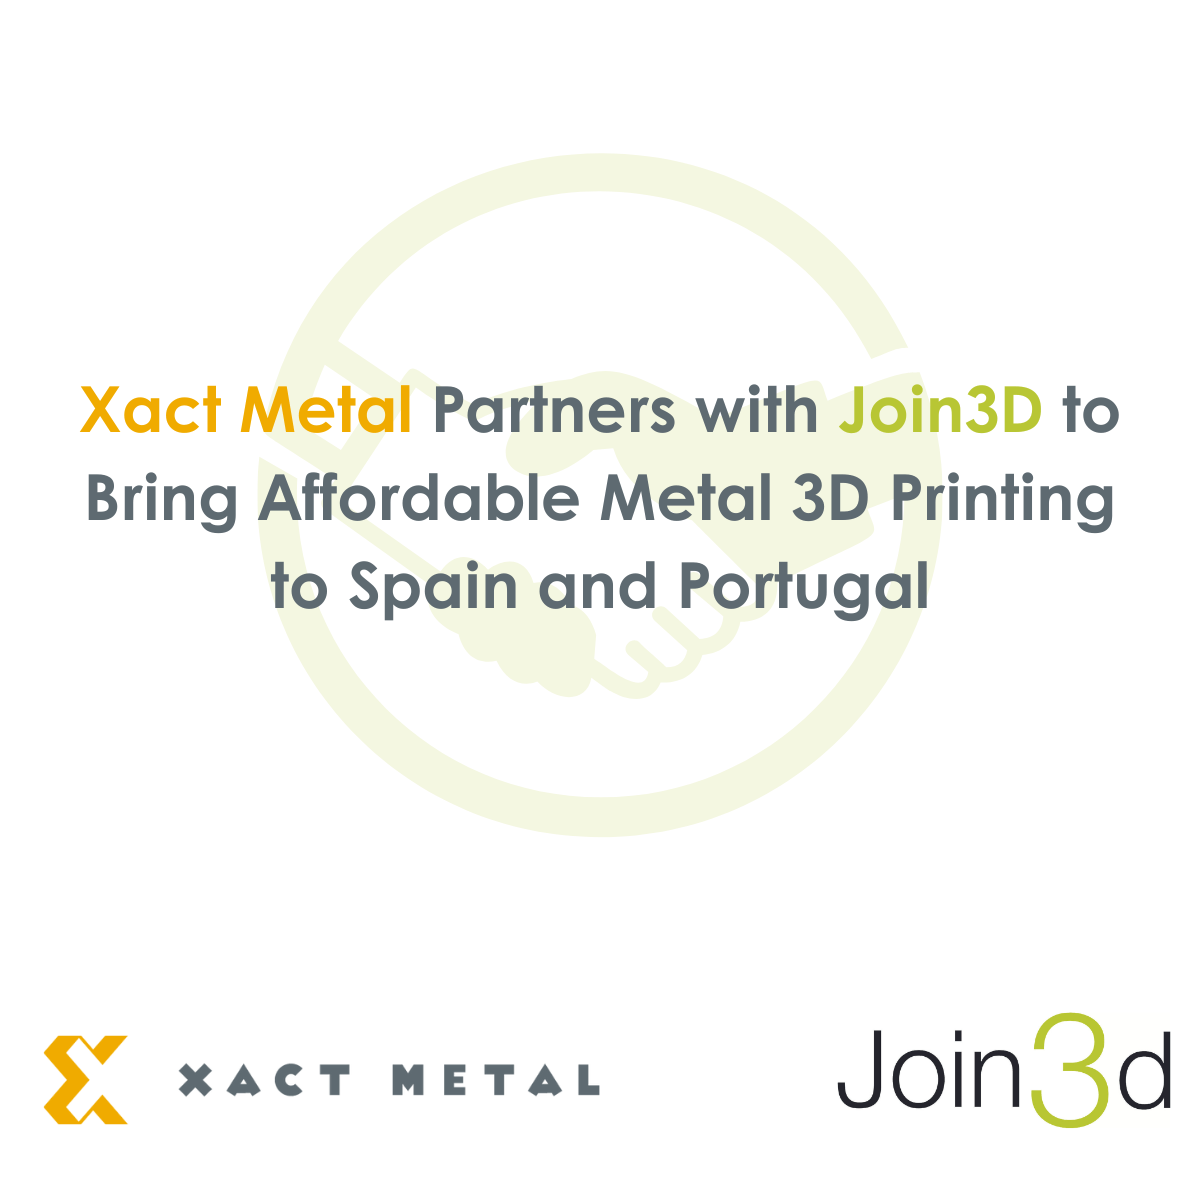 Xact Metal Partners with Join3D to Bring Affordable Metal 3D Printing to Spain and Portugal